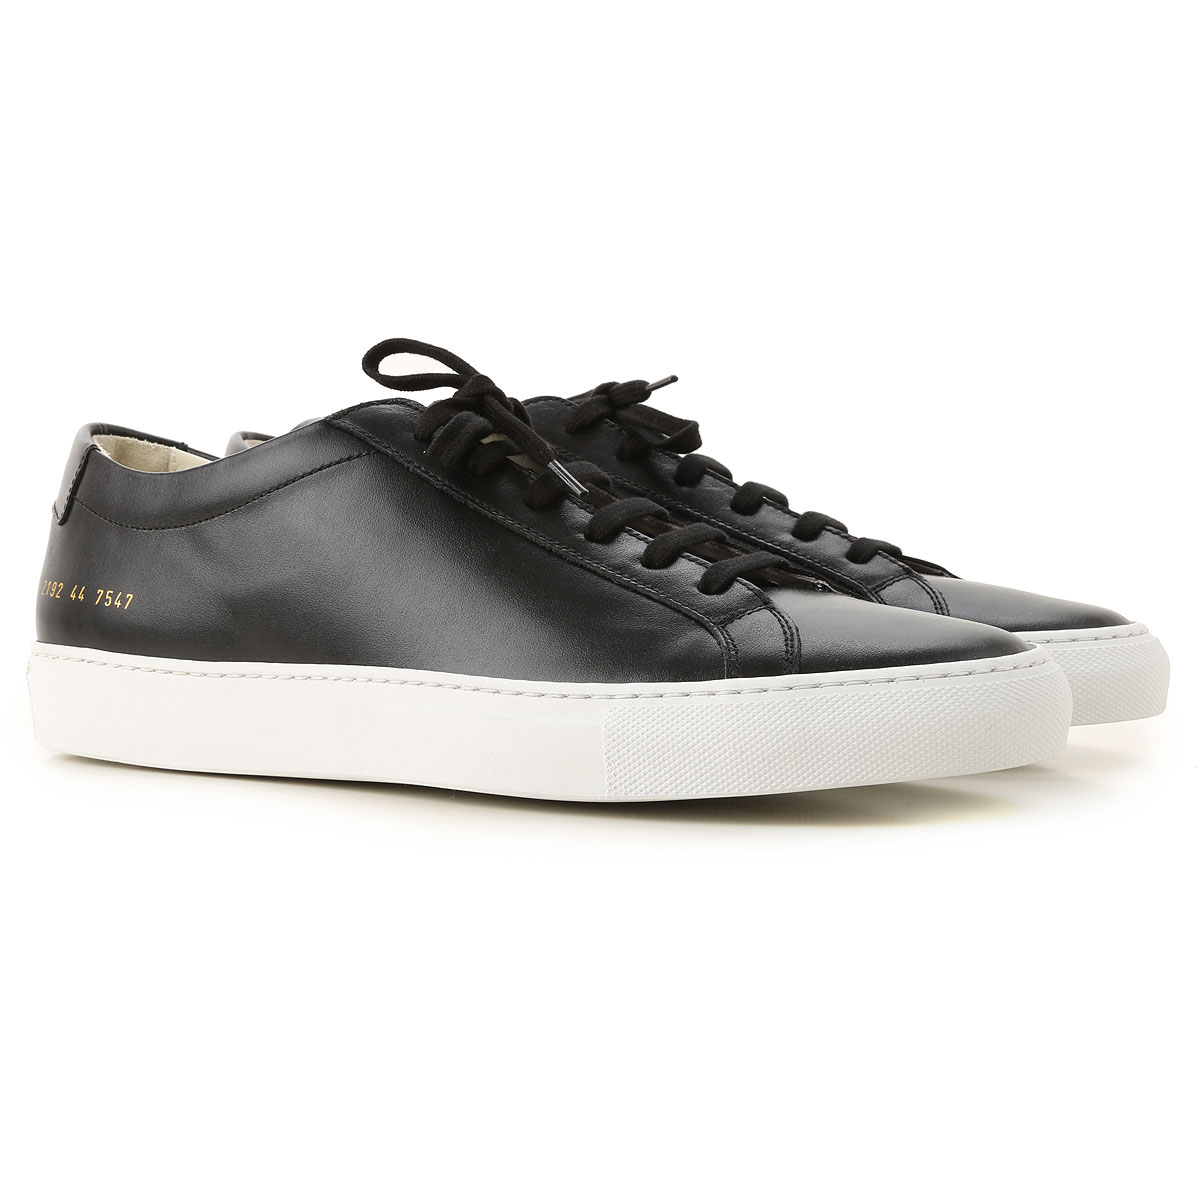 Mens Shoes Common Projects, Style code: 2192-7547-